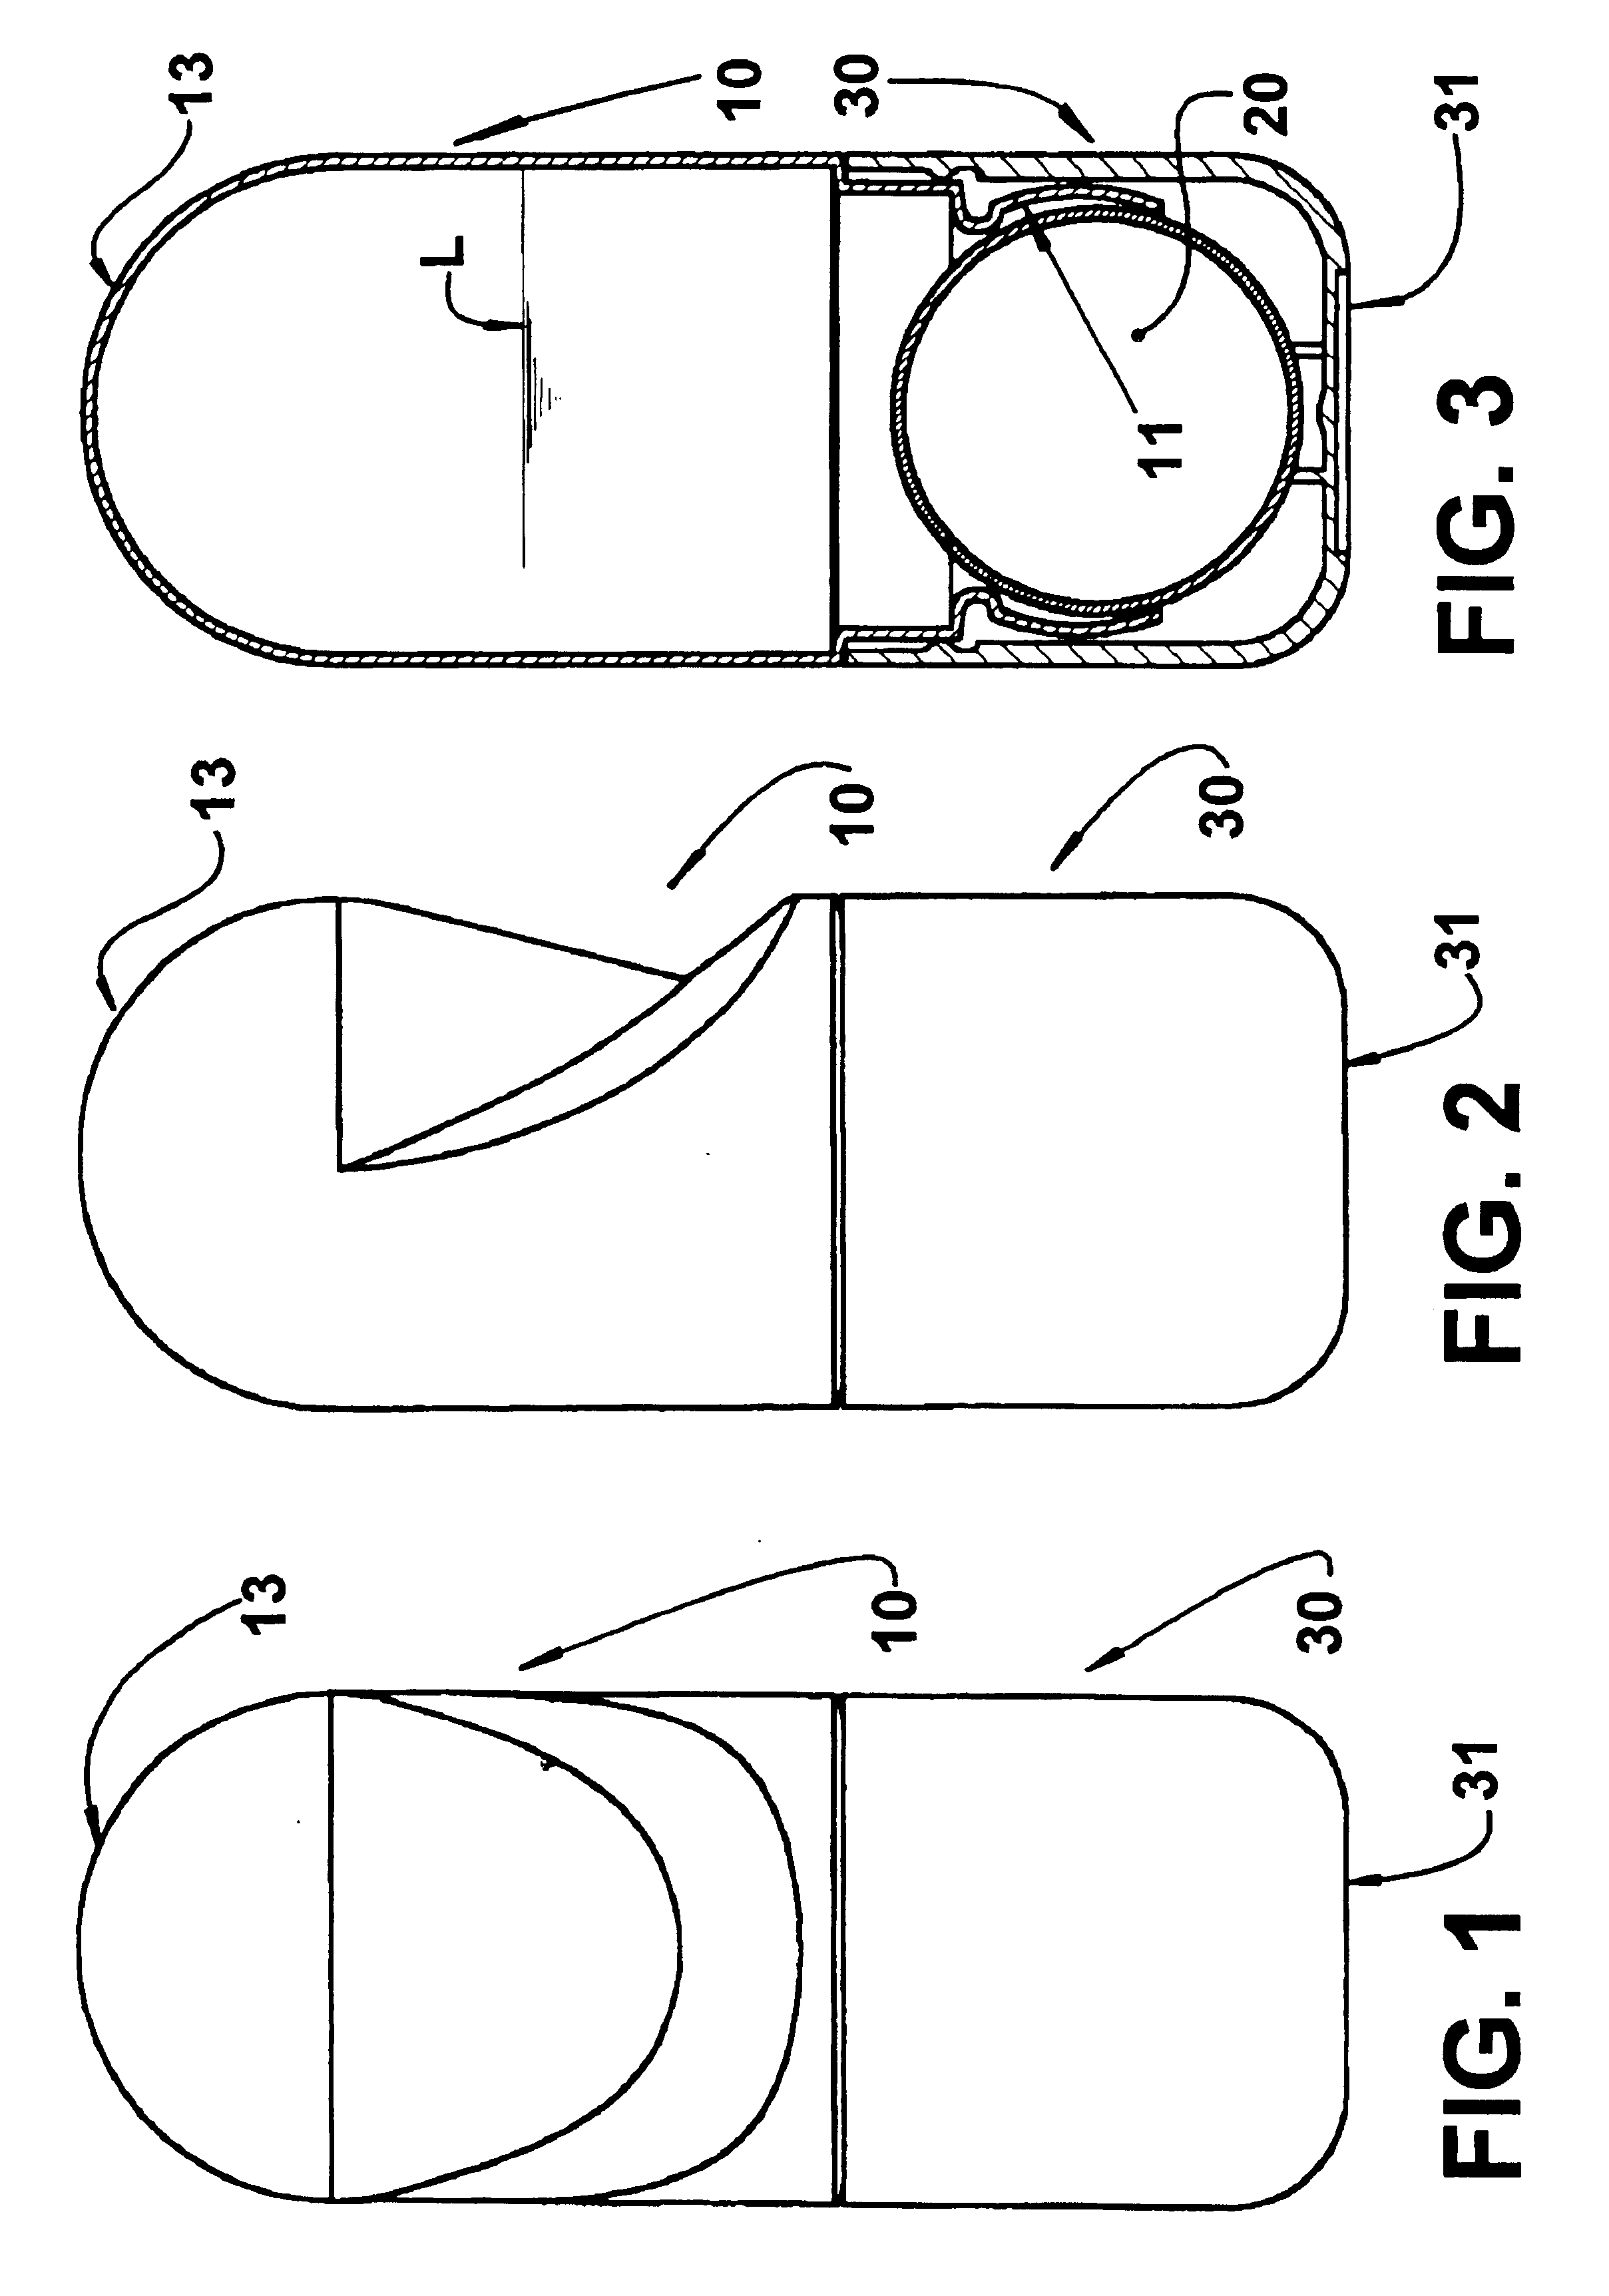 Container for storing and applying a liquid deodorant